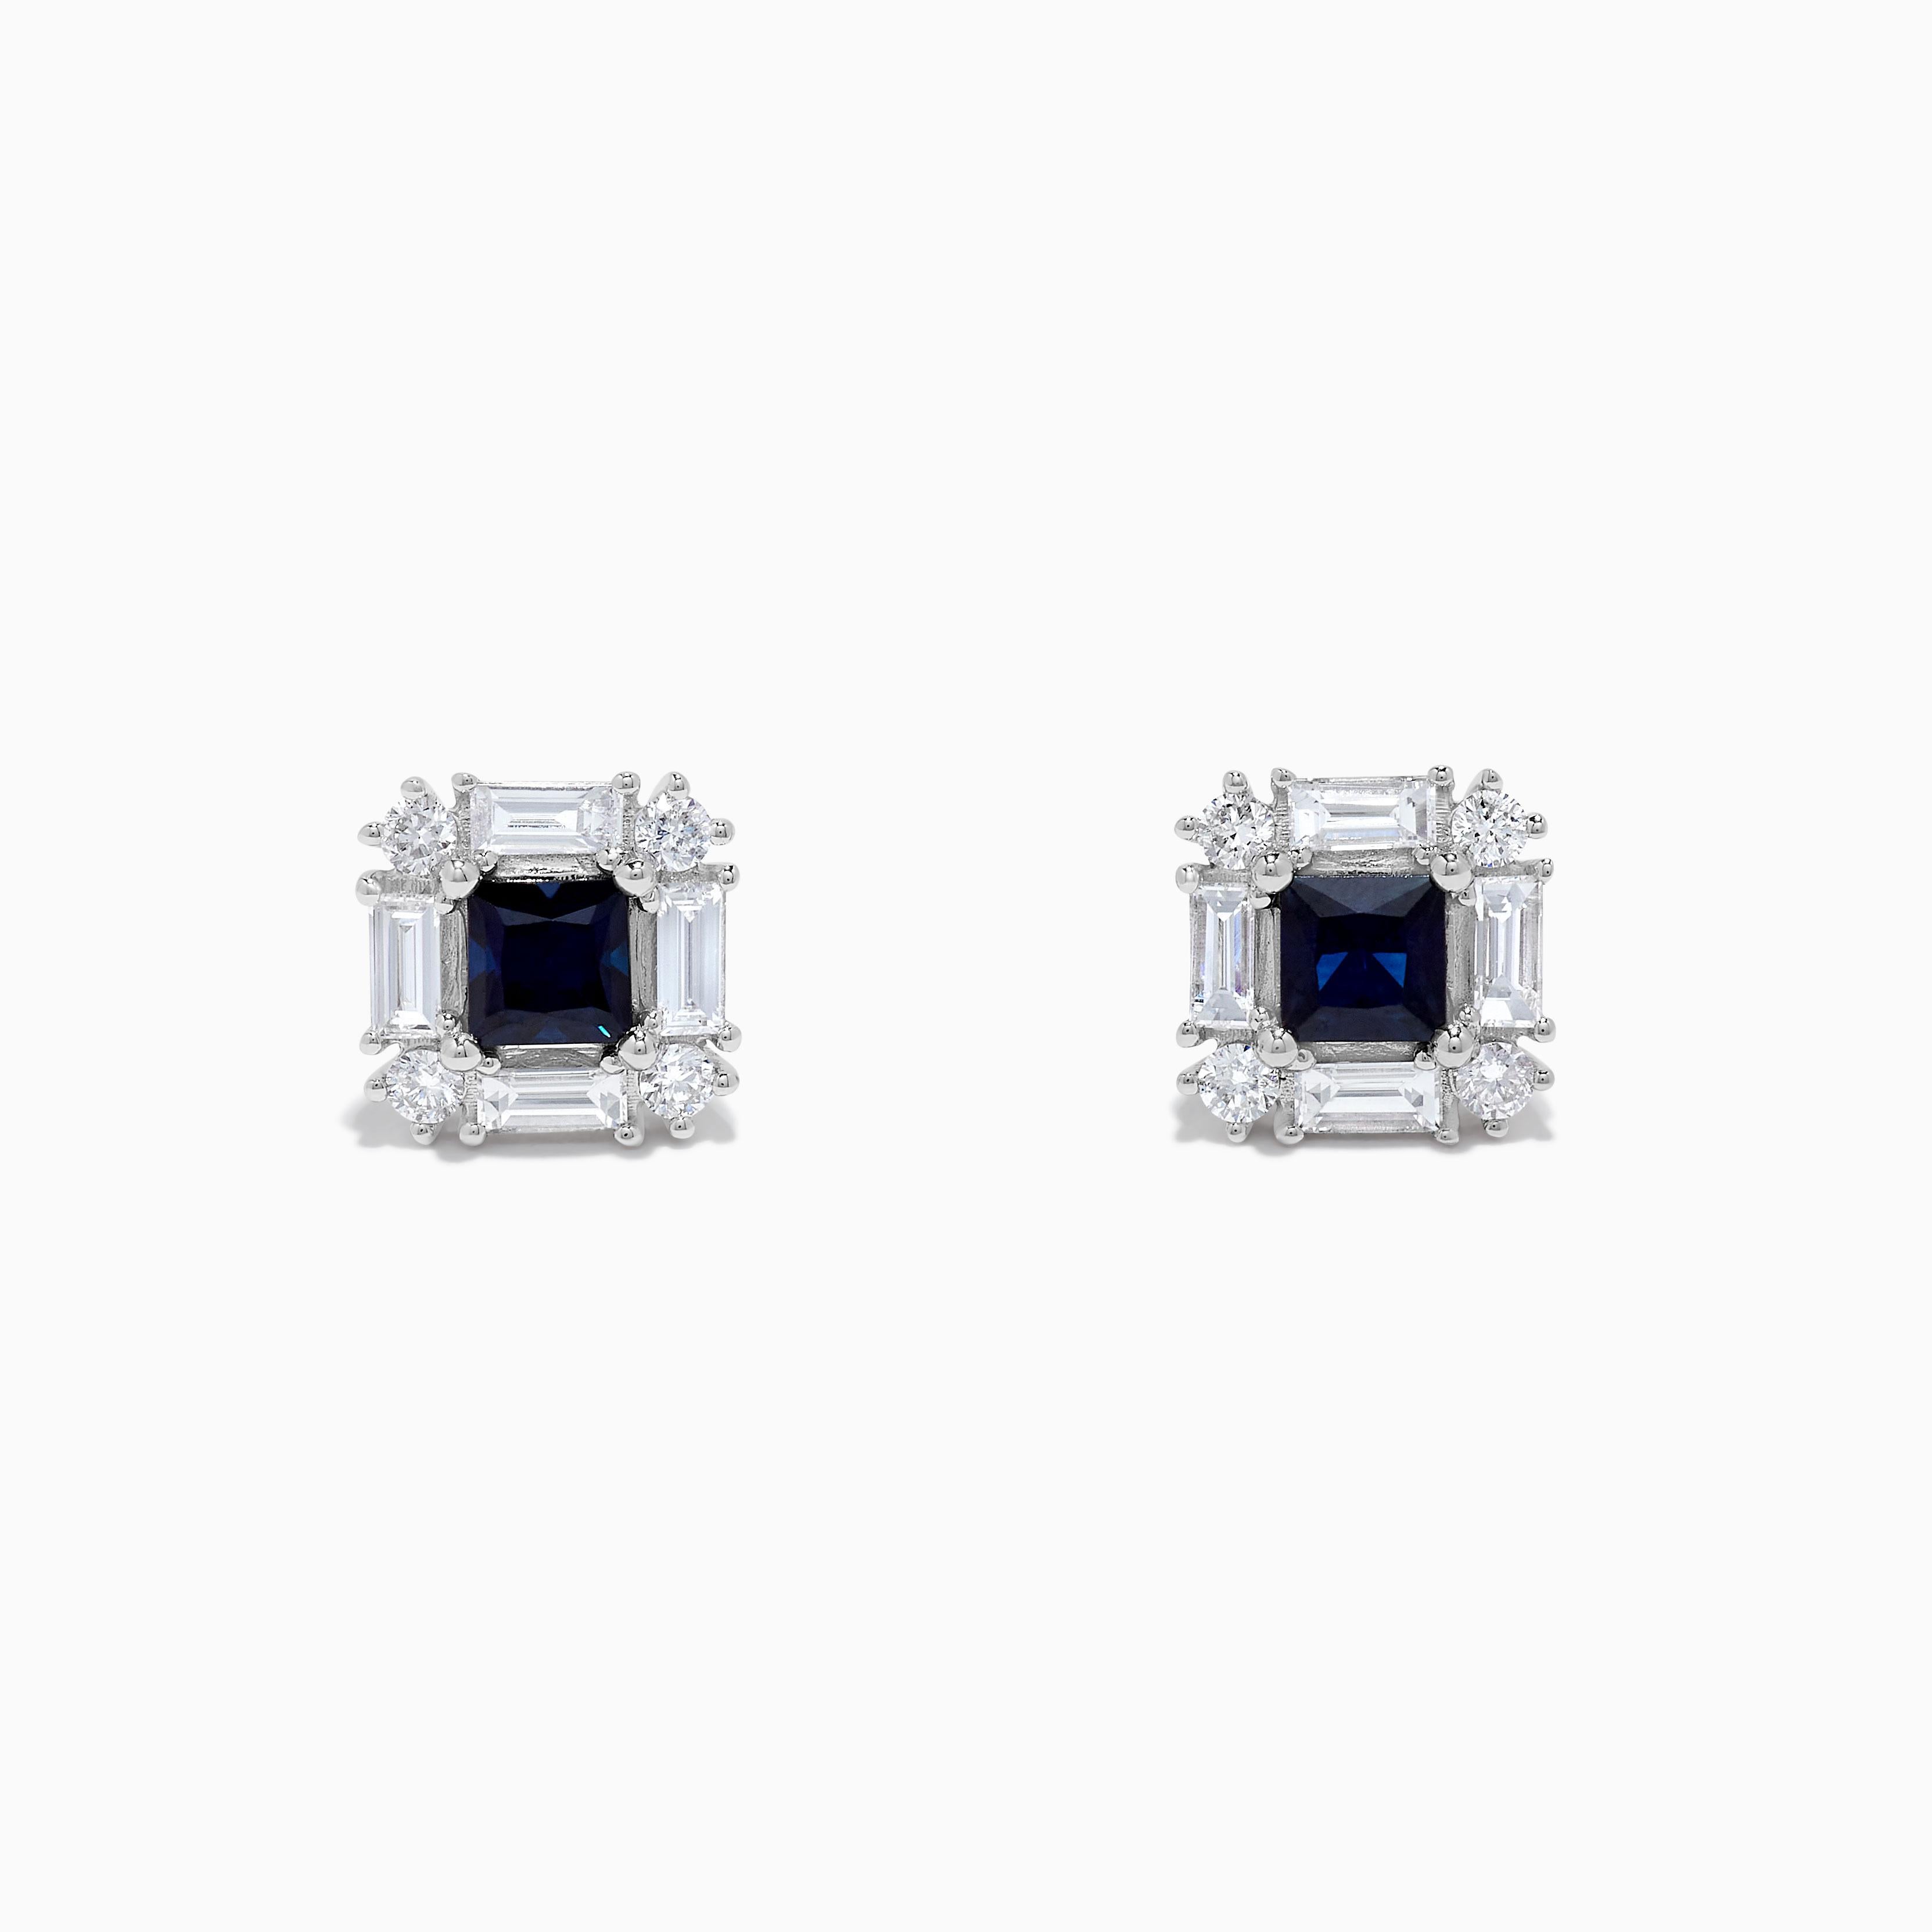 RareGemWorld's classic sapphire earrings. Mounted in a beautiful 18K White Gold setting with natural princess cut blue sapphires. The sapphires are surrounded by natural round white diamond melee and natural baguette cut white diamonds. These